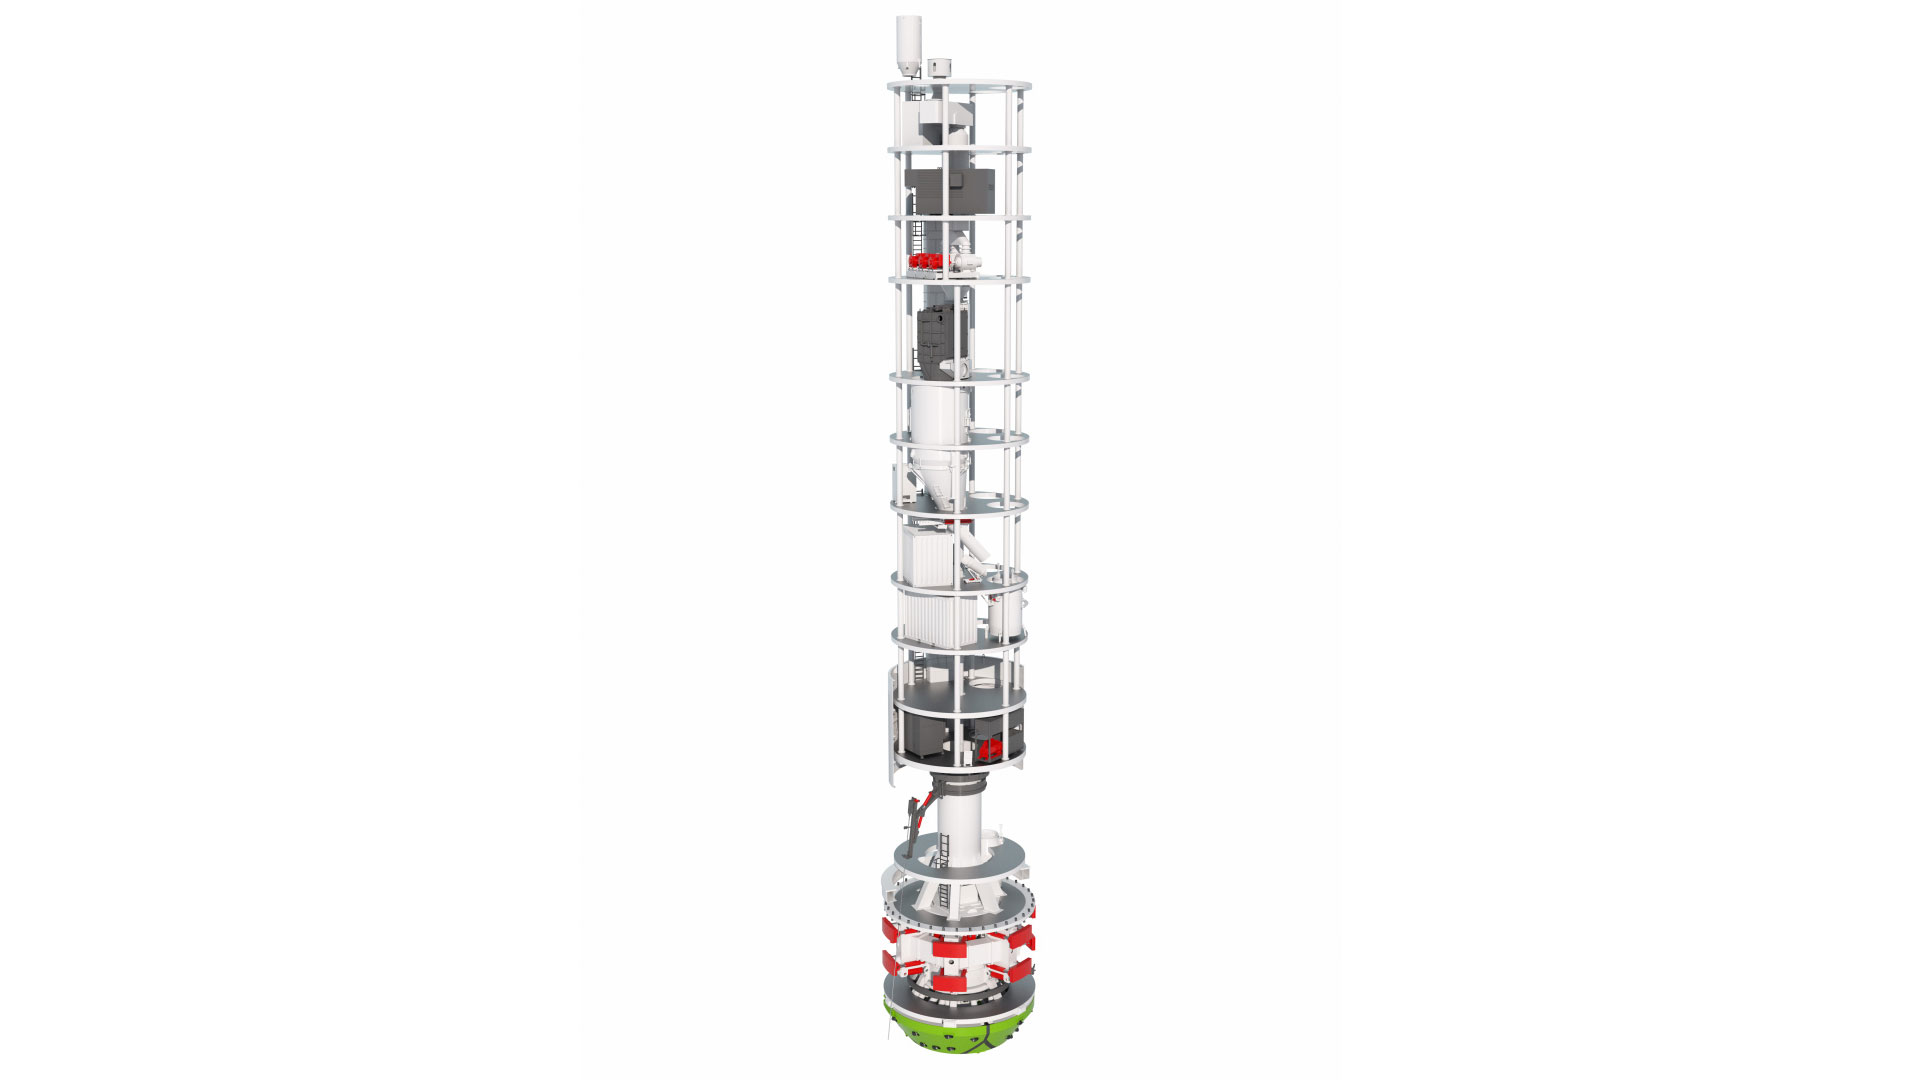 3D illustration of a Shaft Boring Cutterhead in white and red with a green cutterhead